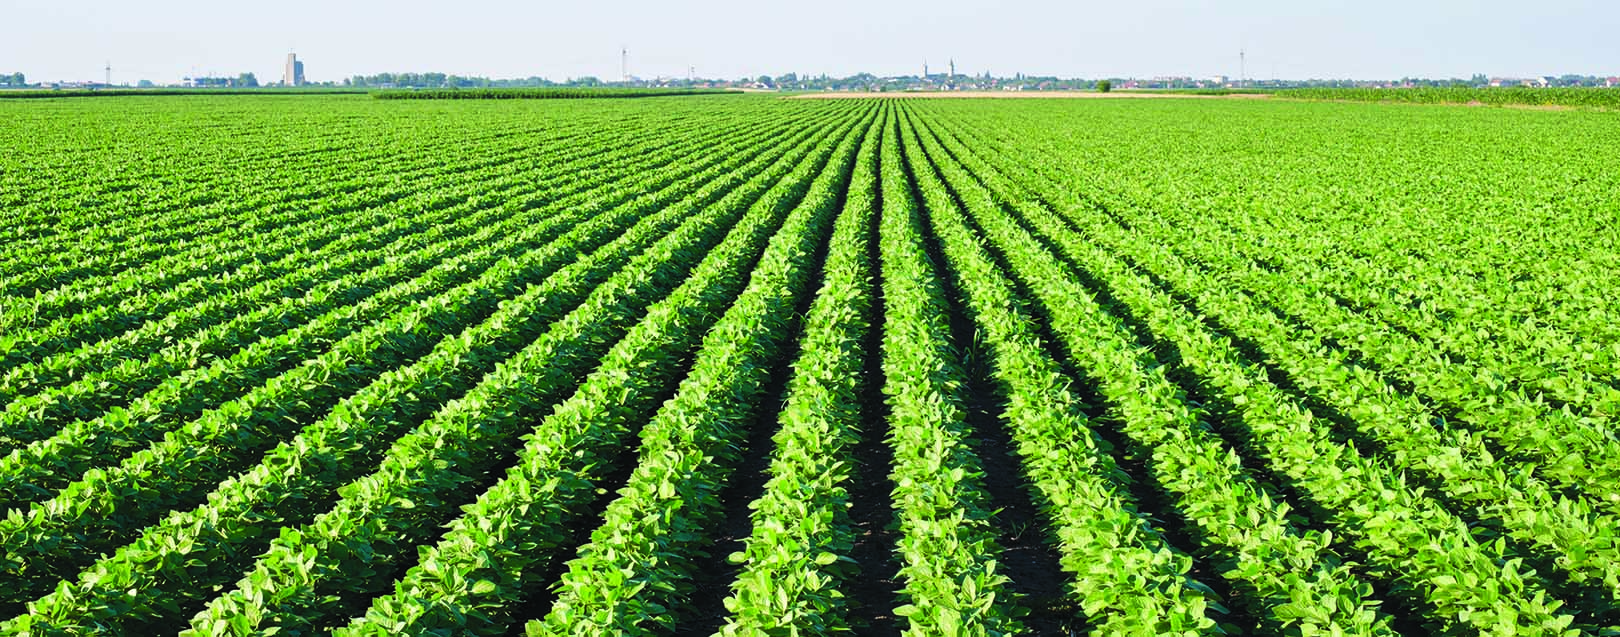 Soybean Meals – In urgent need of a tailwind March 2018 issue